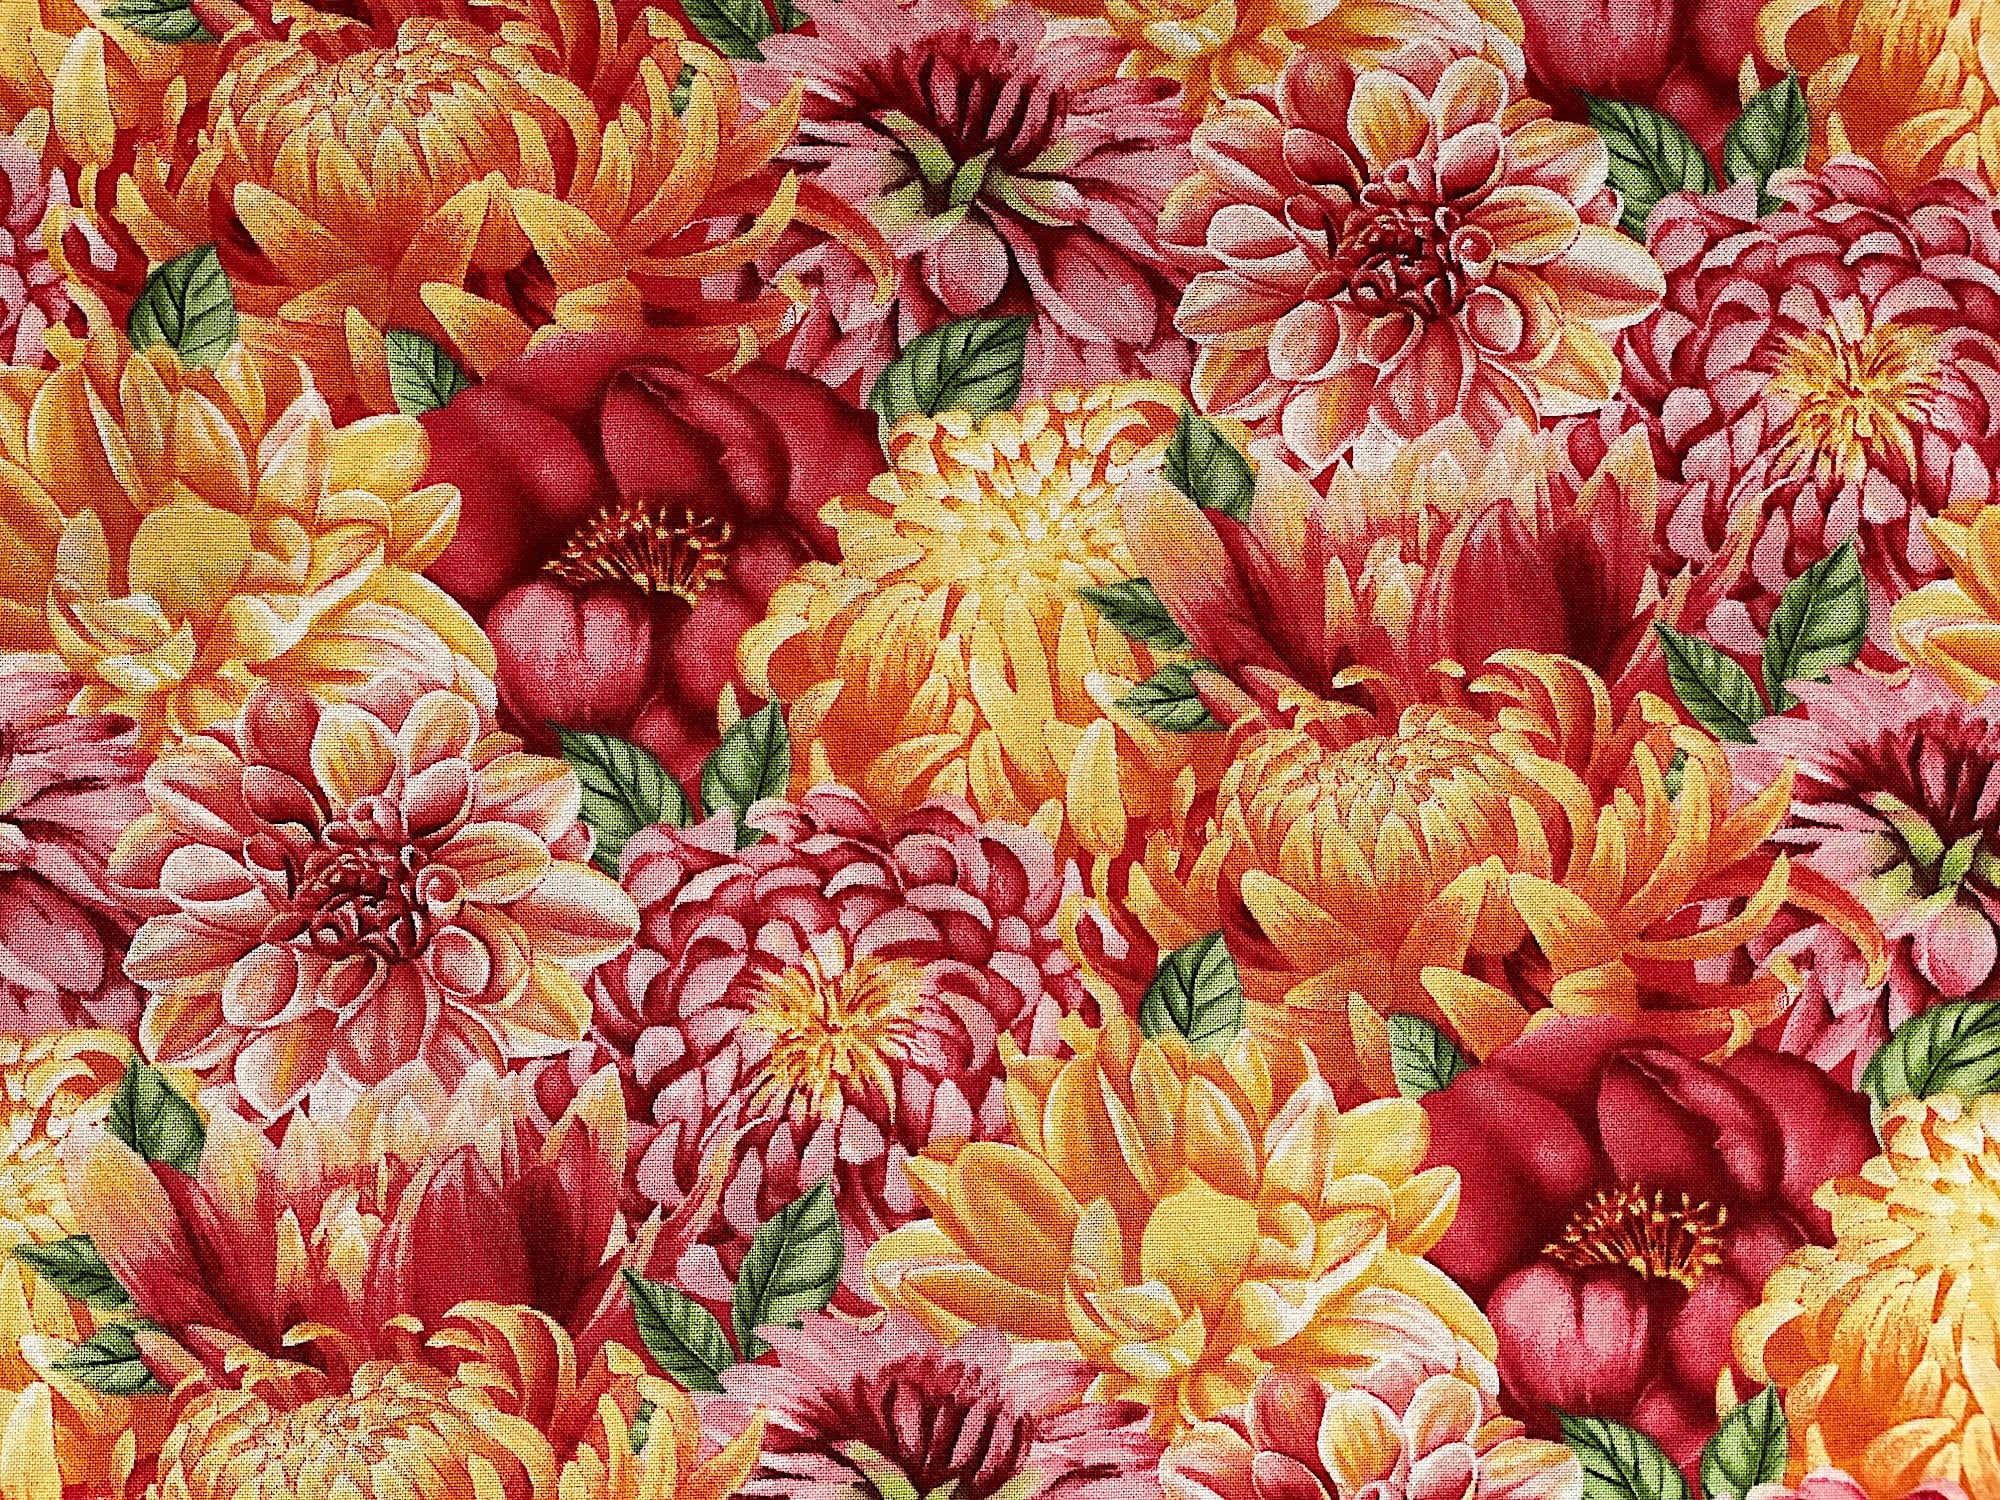 Close up of chrysanthemums and peonies.